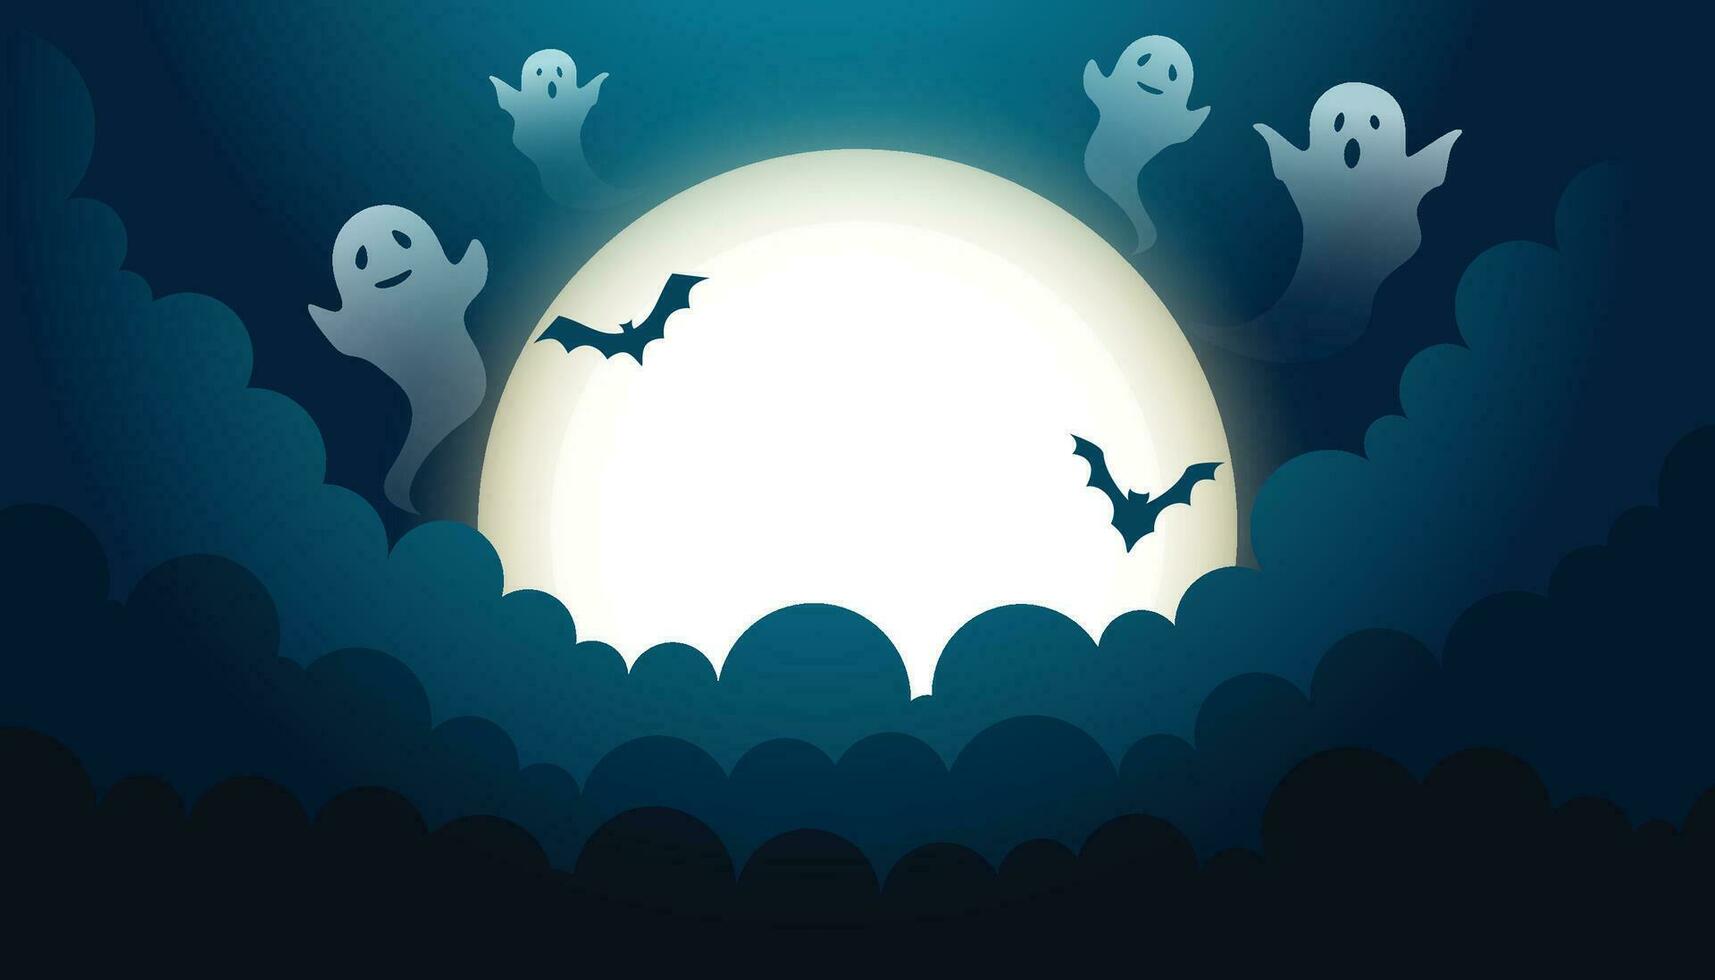 Halloween card template with full moon, spooky castle, pumpkins and bats. vector